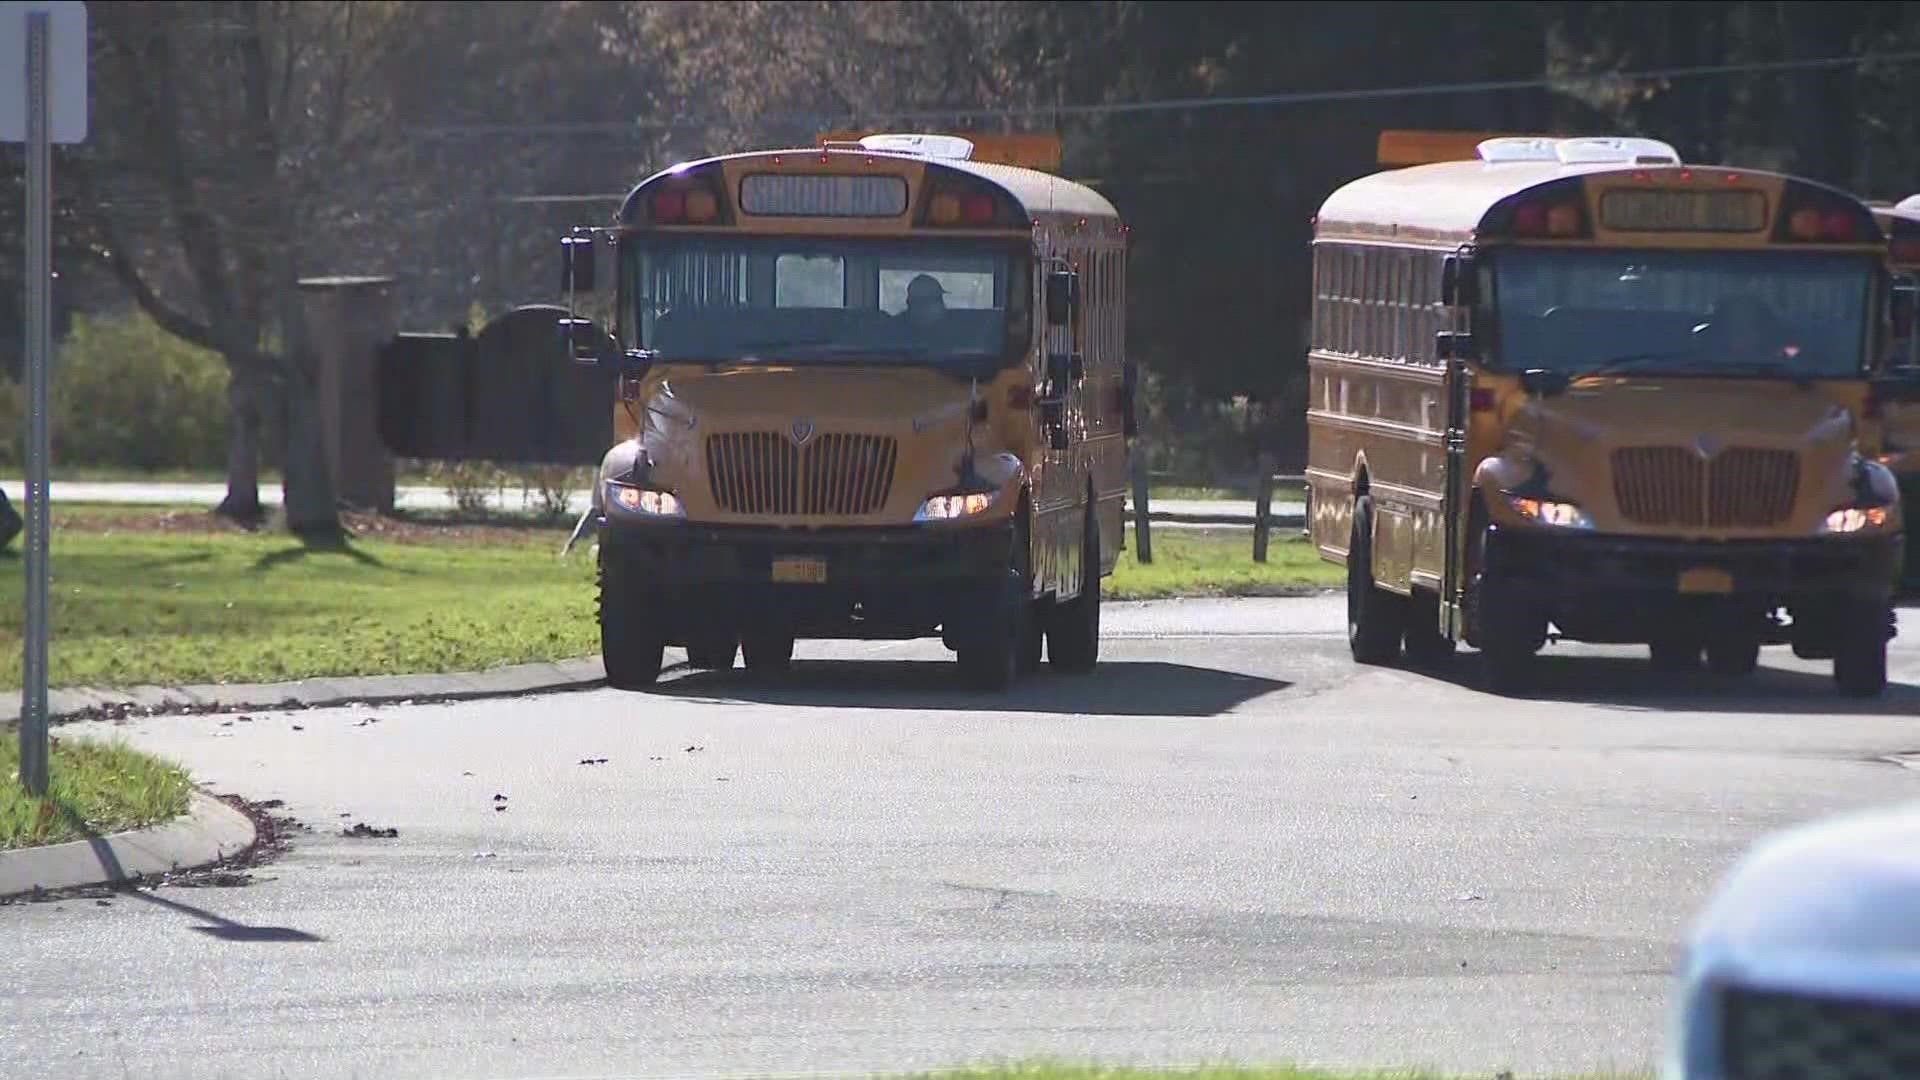 Buffalo Public Schools Struggle With A Shortage Of Bus Drivers And Bus Aides